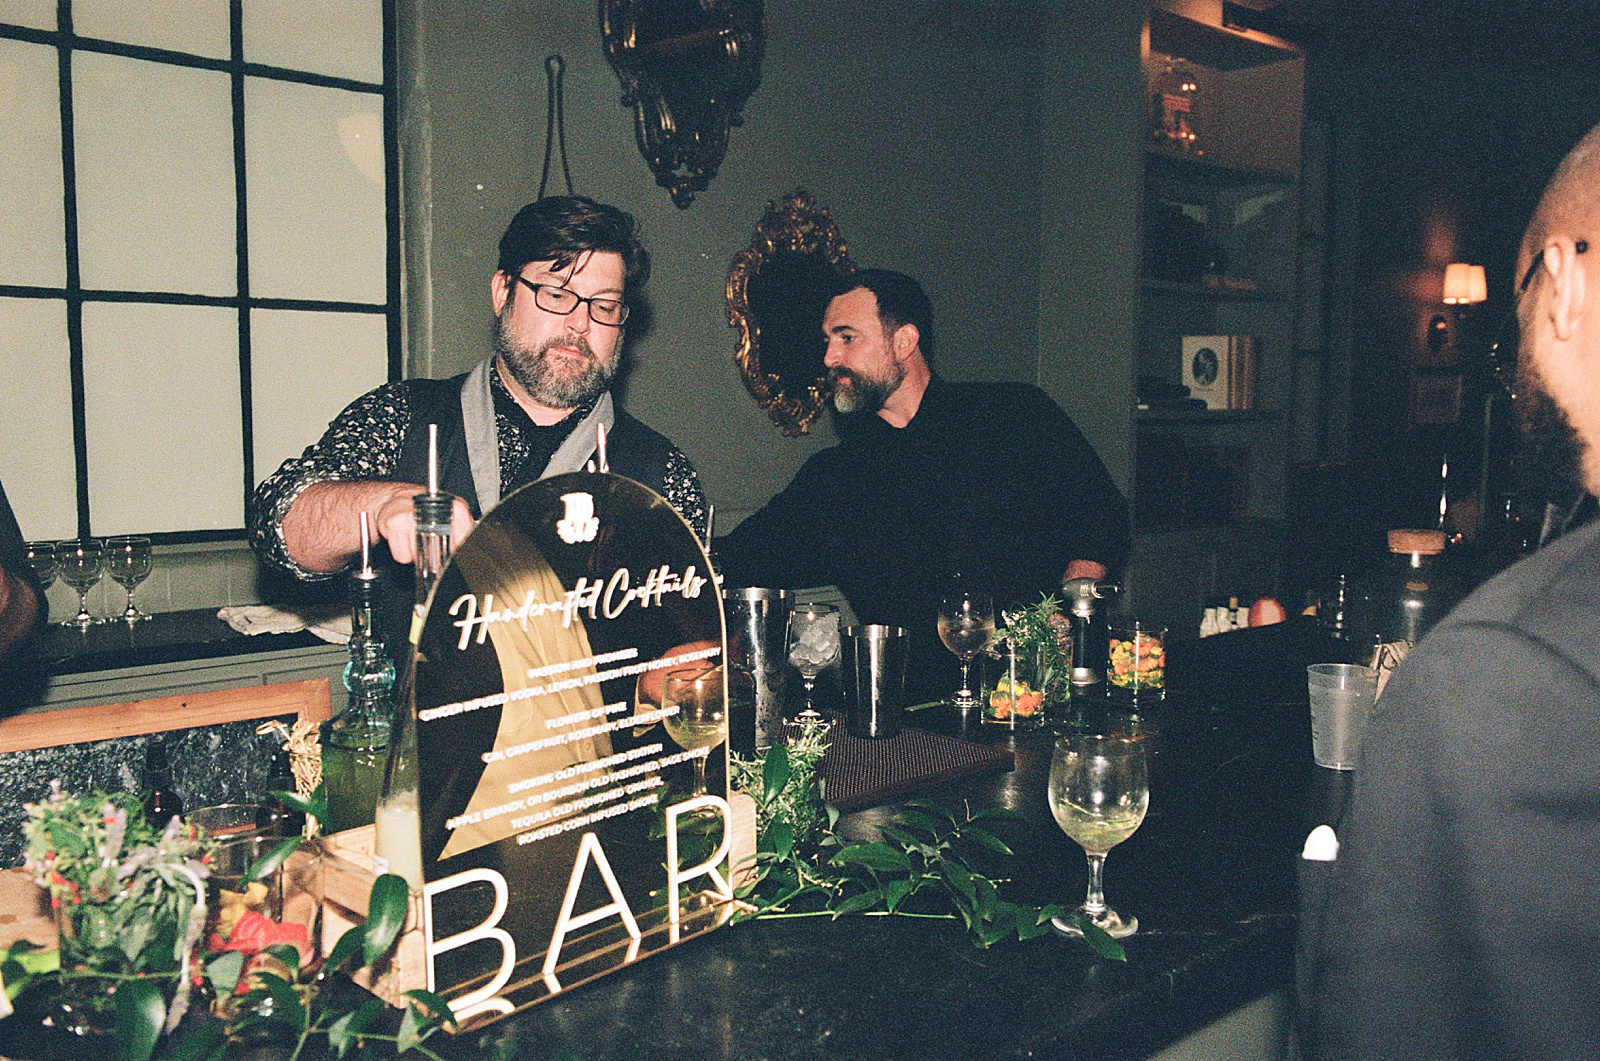 Bar tenders mix signature wedding cocktails in wedding photography on film.